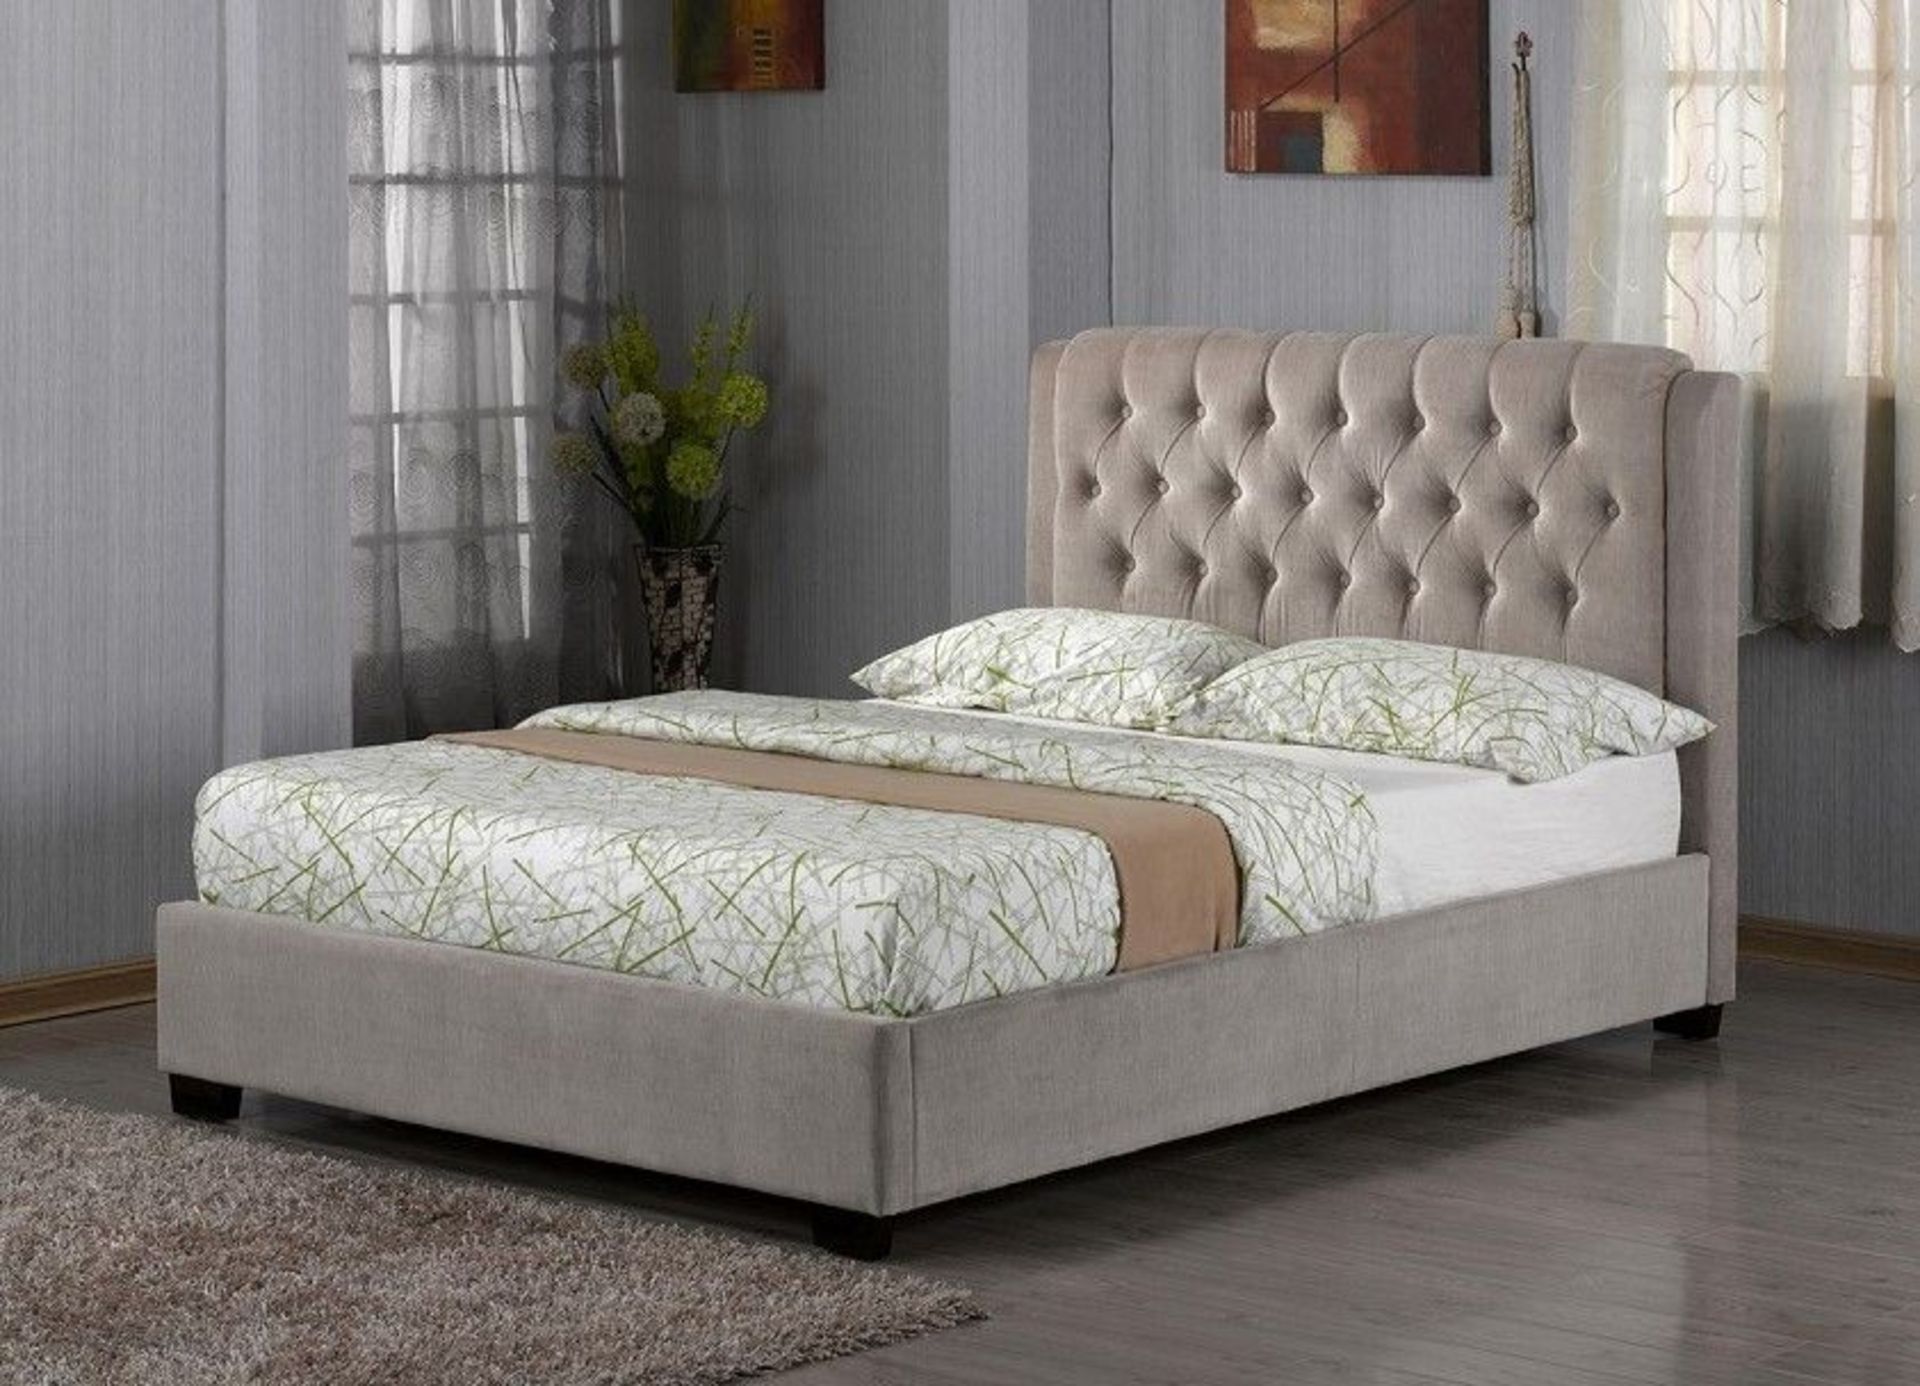 BRAND NEW BOXED 4'6 DOUBLE MESSIDY BEDSTEAD IN BEIGE/TAN FABRIC